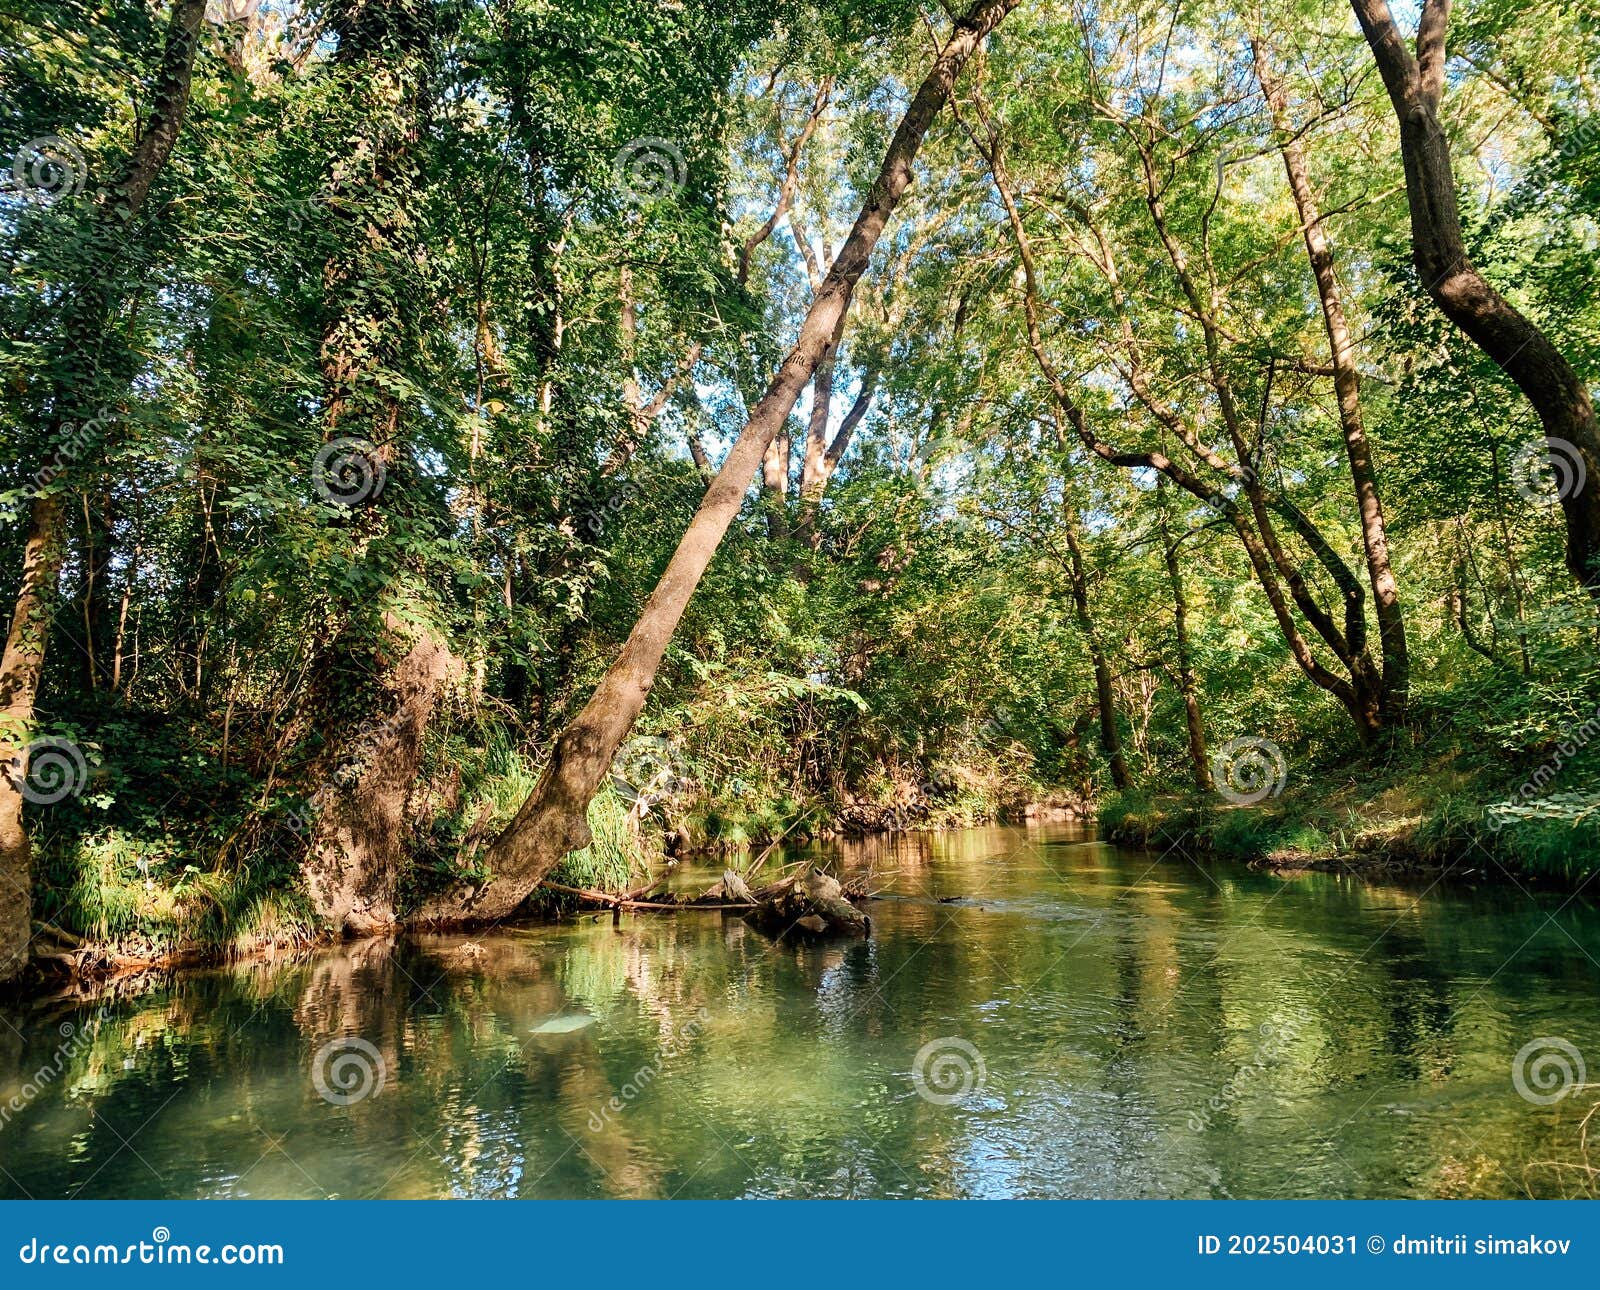 Beautiful Forest River and Green Forest Landscape Stock Image - Image ...